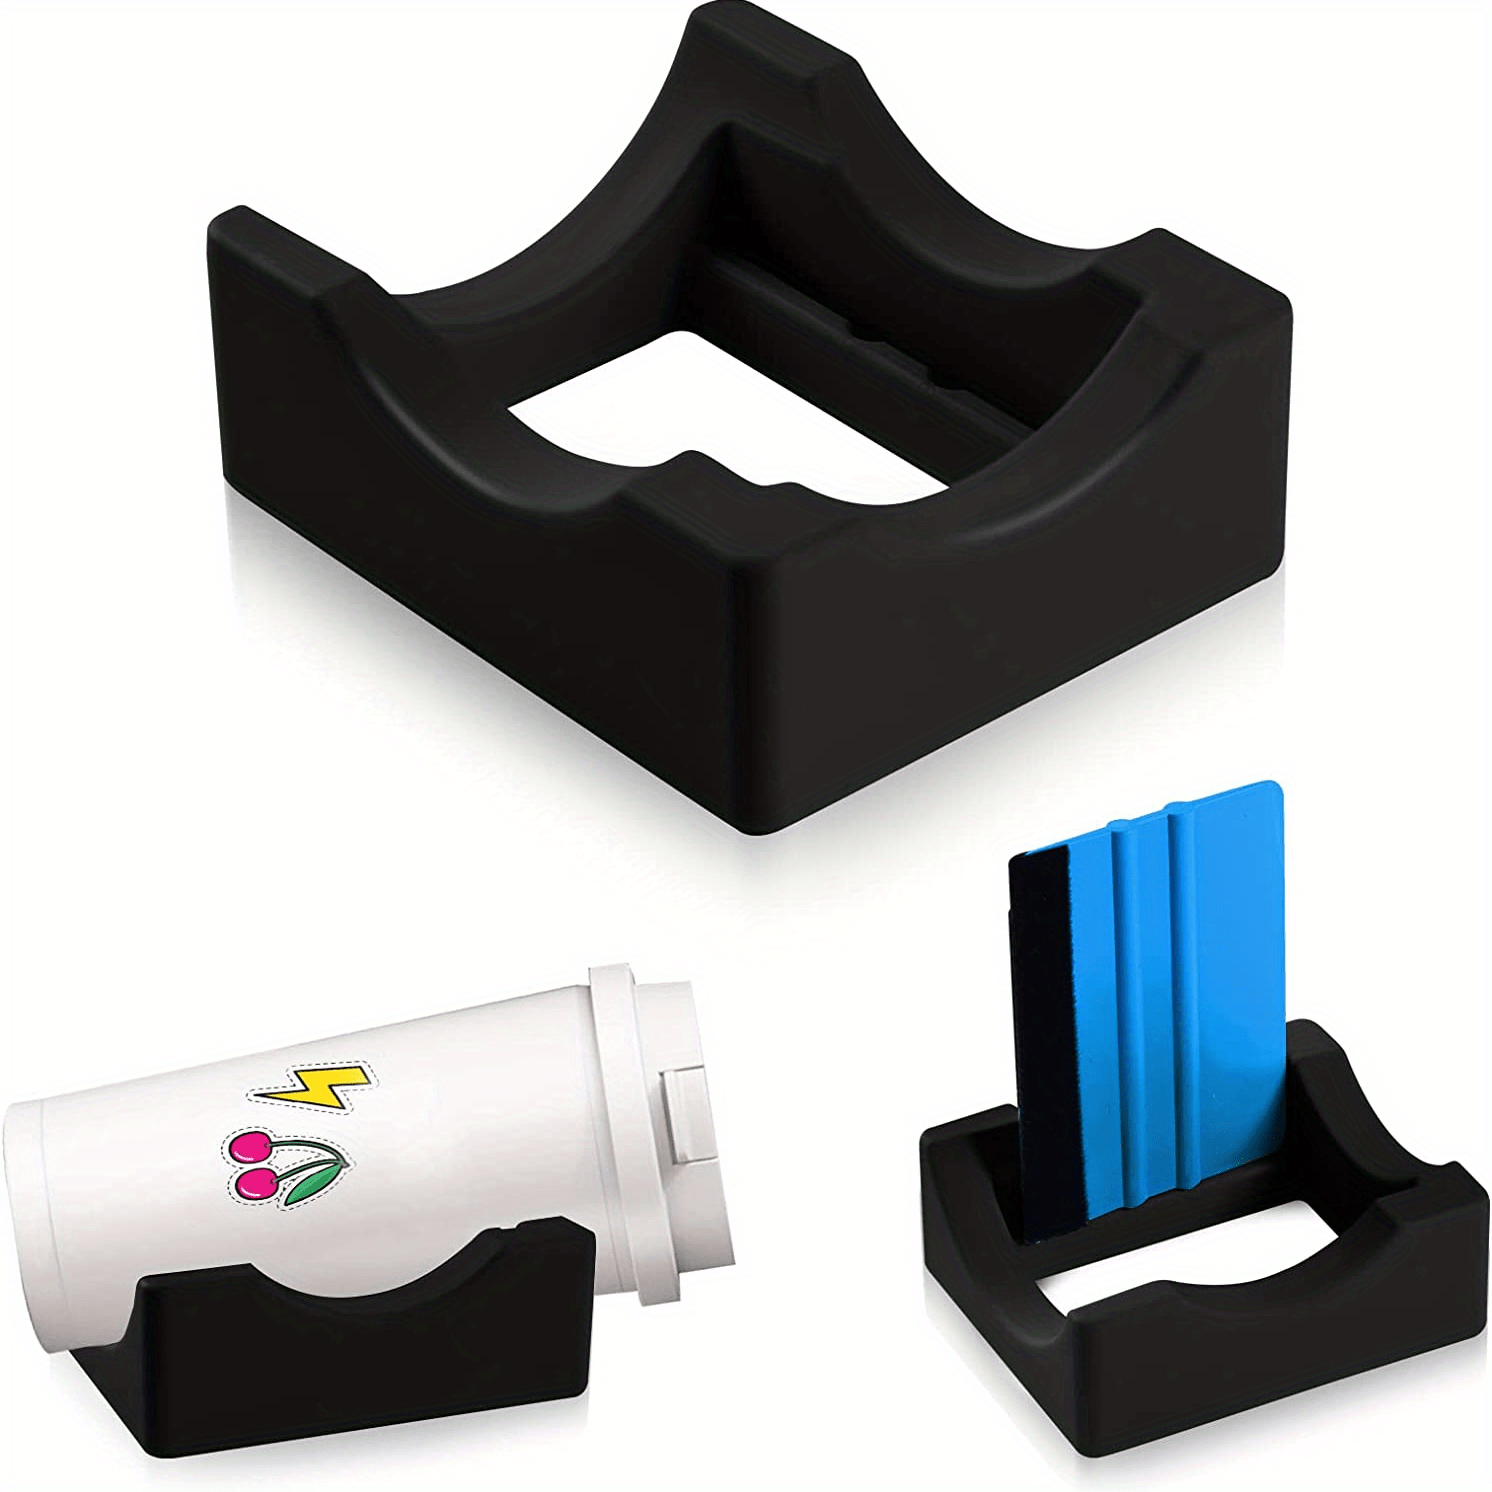 JTWEEN Silicone Cup Cradle with Built-in Slot,Silicone Cup Cradle